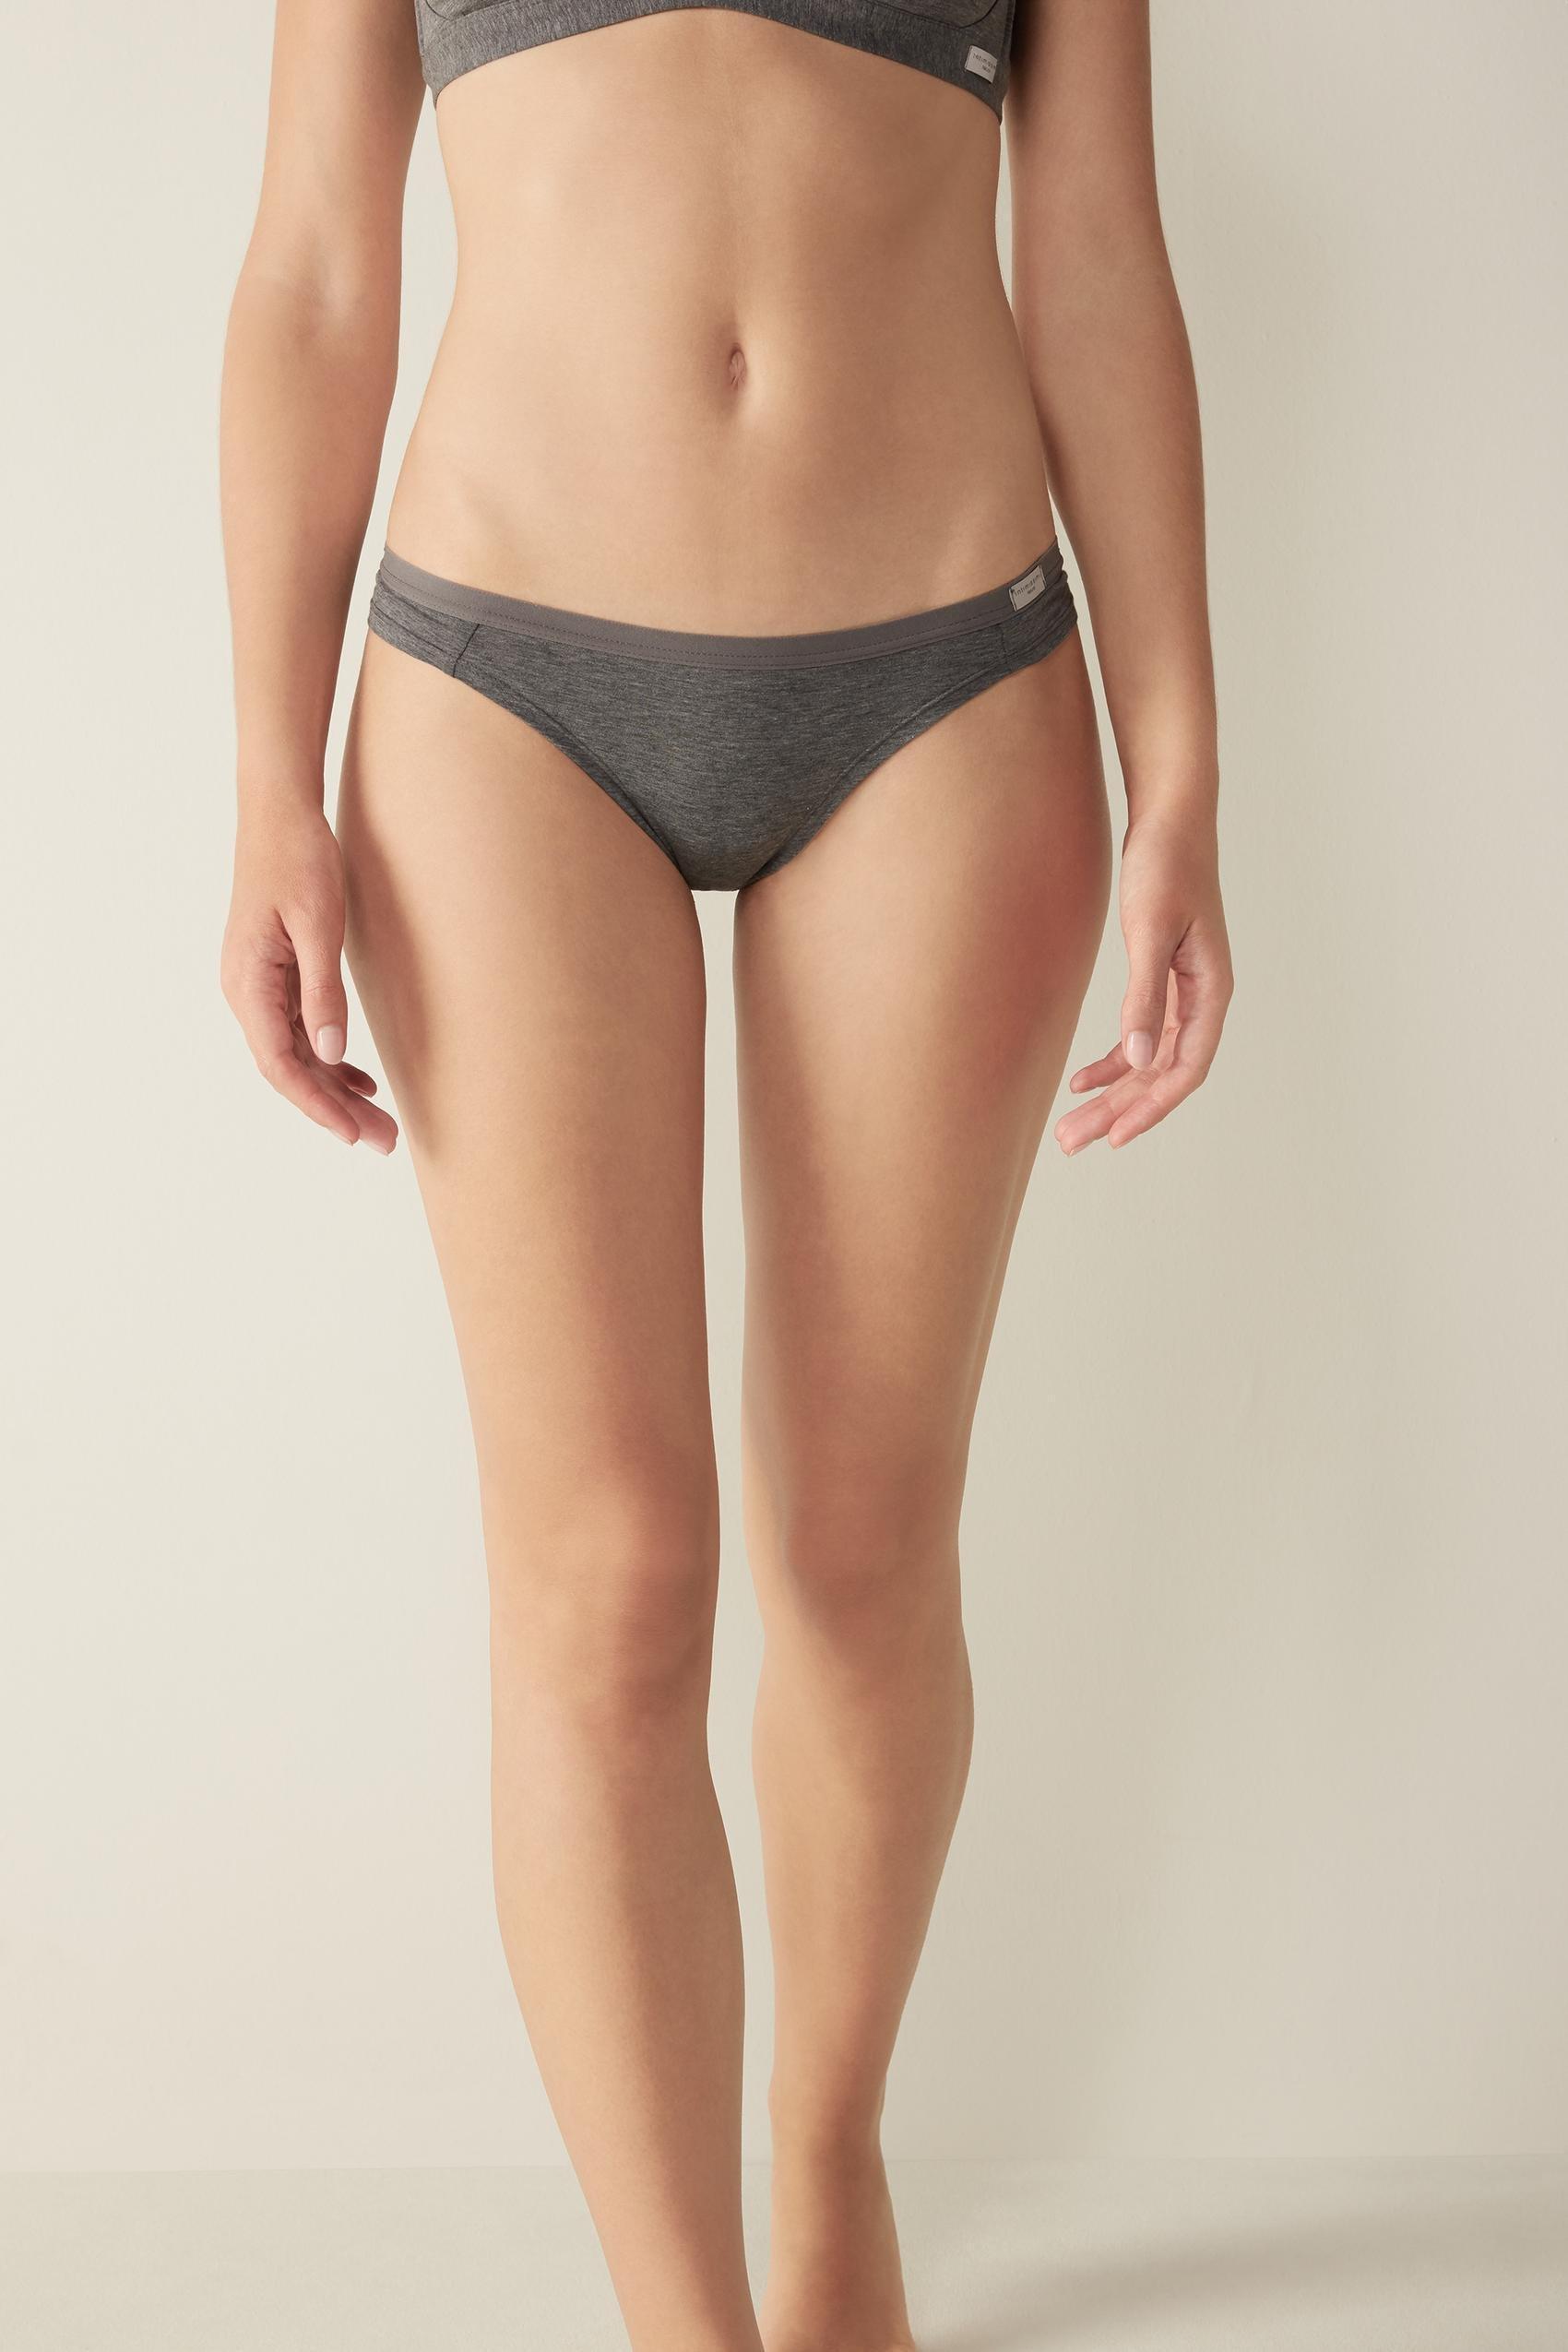 Intimissimi Grey Low Rise Cotton Knickers